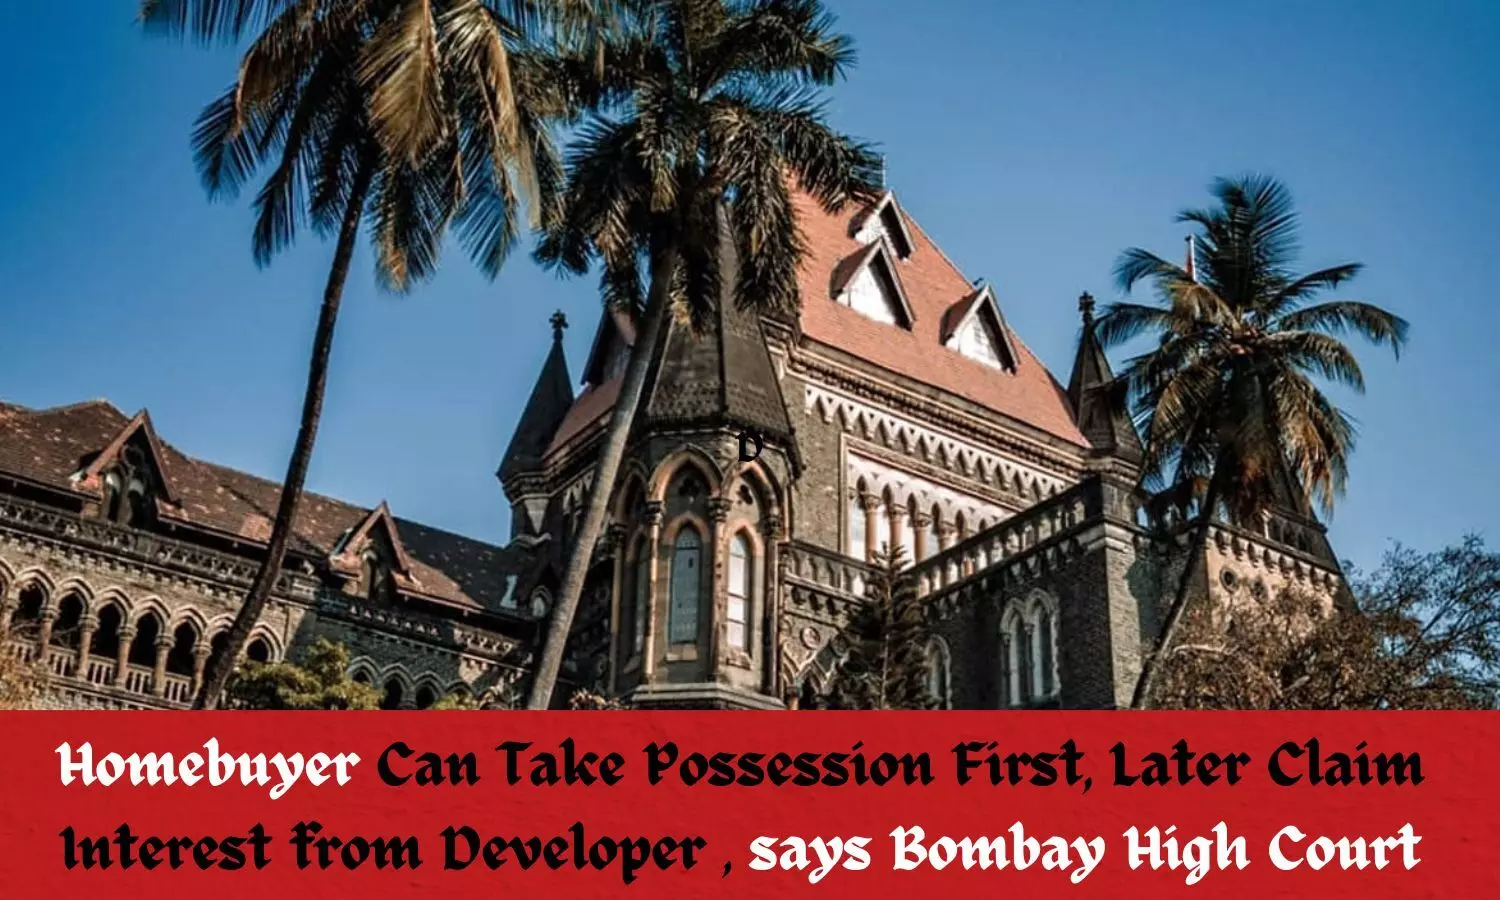 Bombay High Court Rules Homebuyer Can Take Possession First, Later Claim Interest from Developer